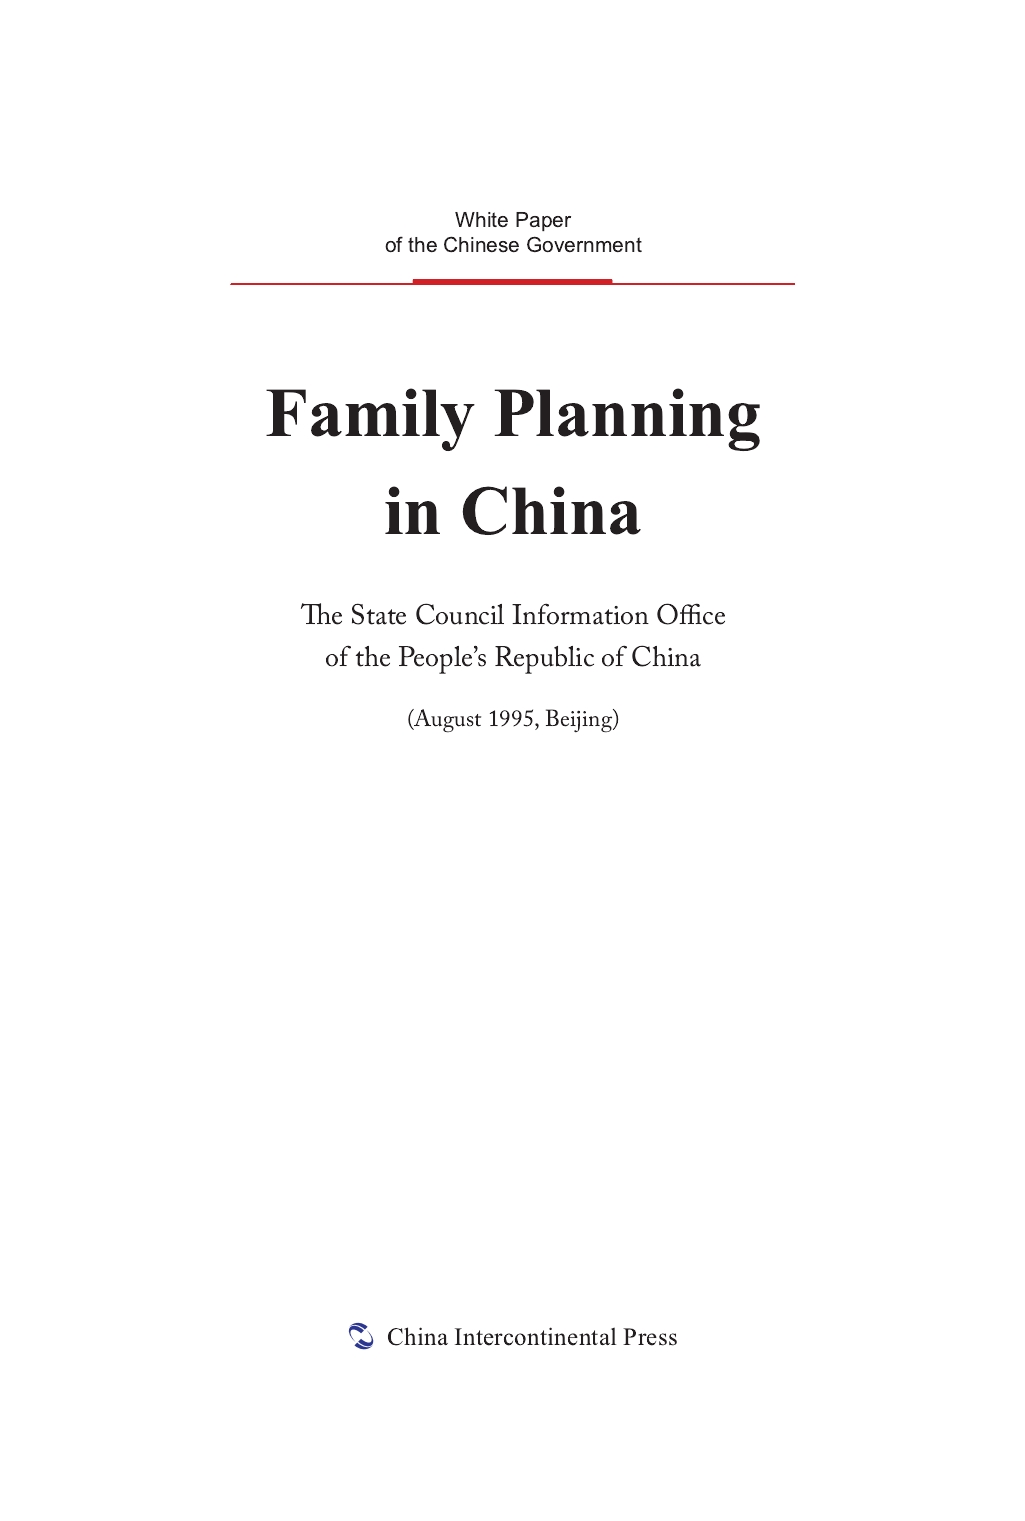 Family Planning in China